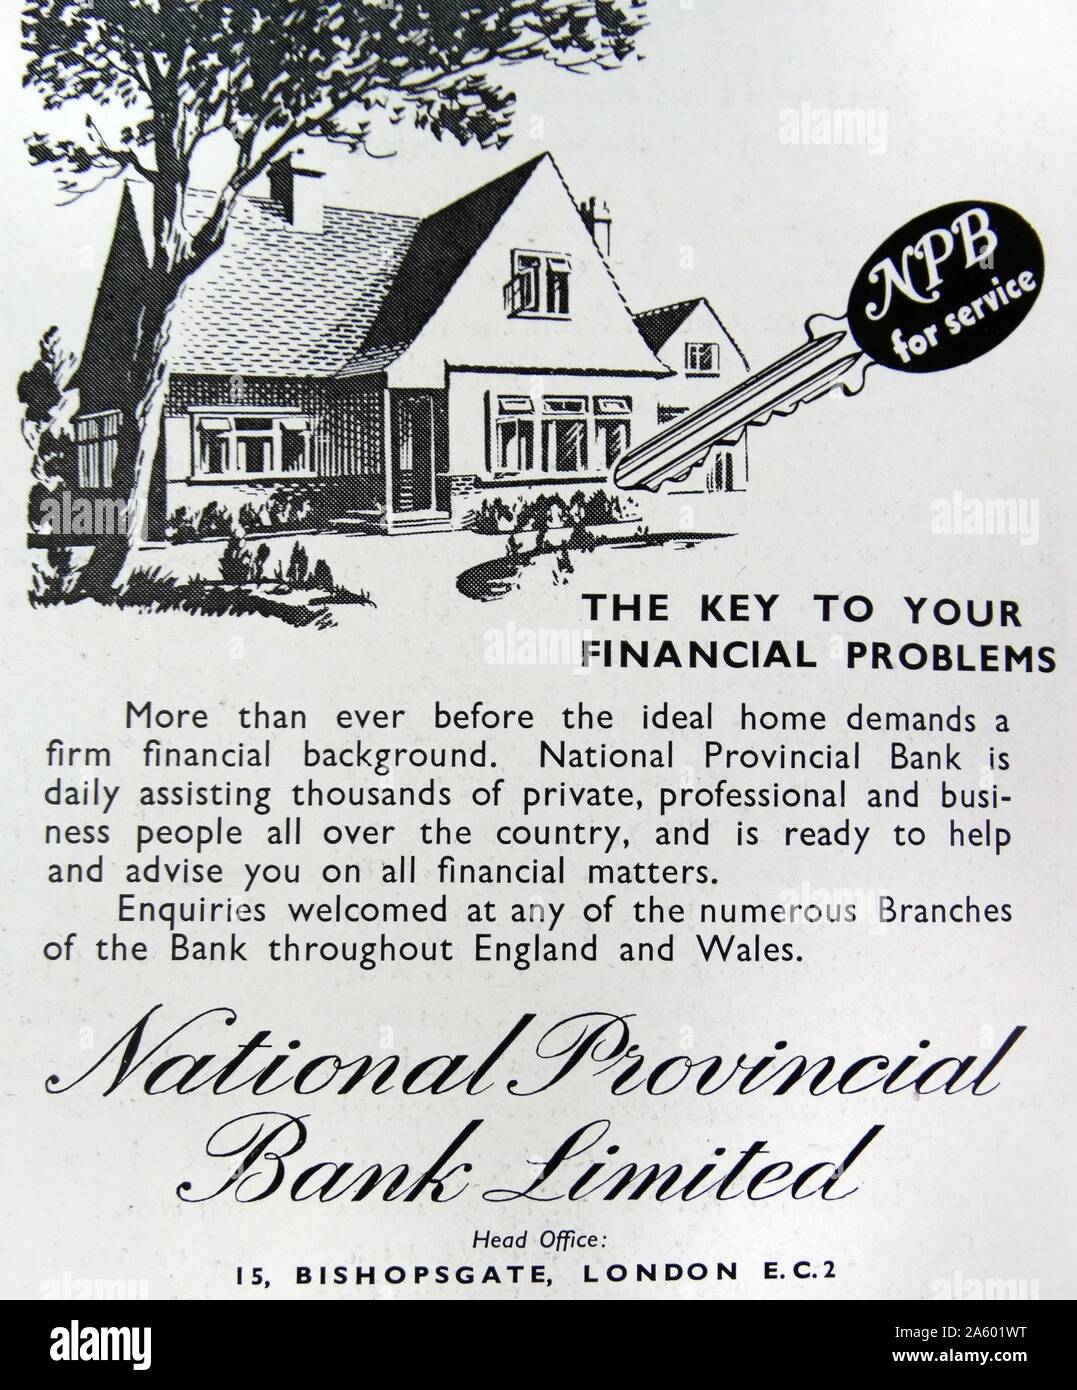 Advert for National Provincial Bank Limited for financial advice Stock Photo